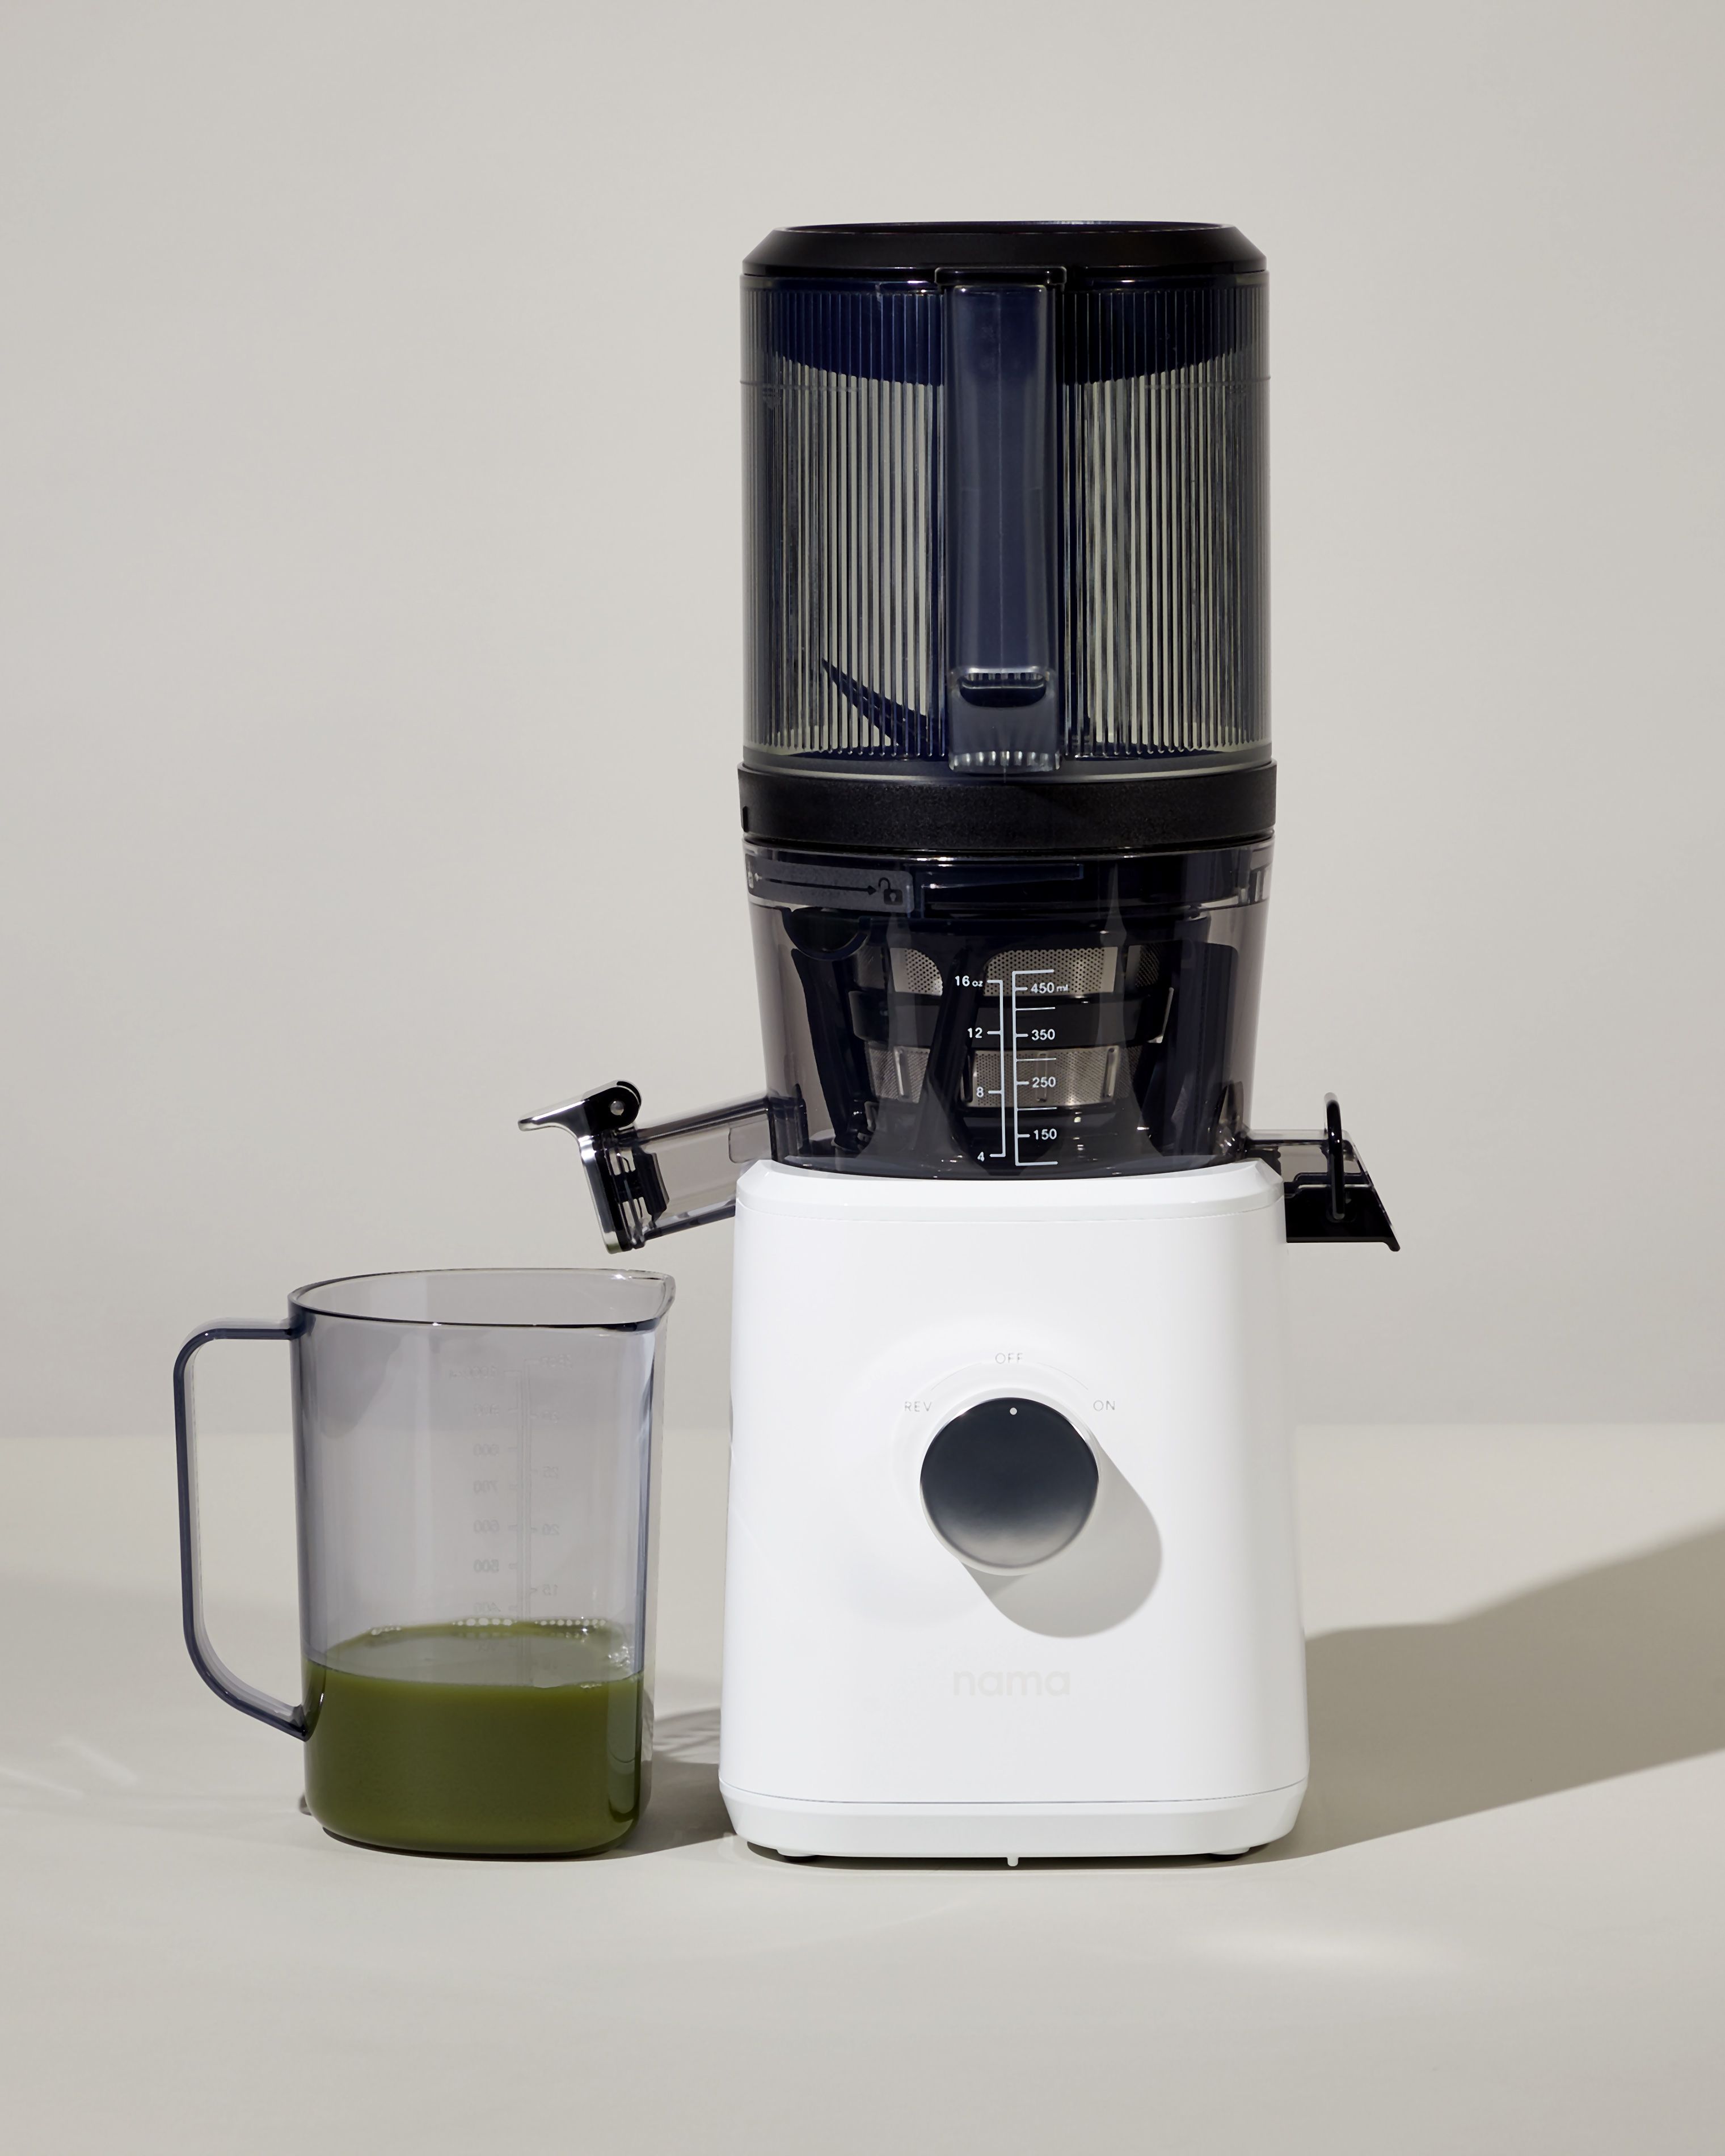 NAMA J2 Juicer Review 2023 - Everything You Need to Know Before Buying! 